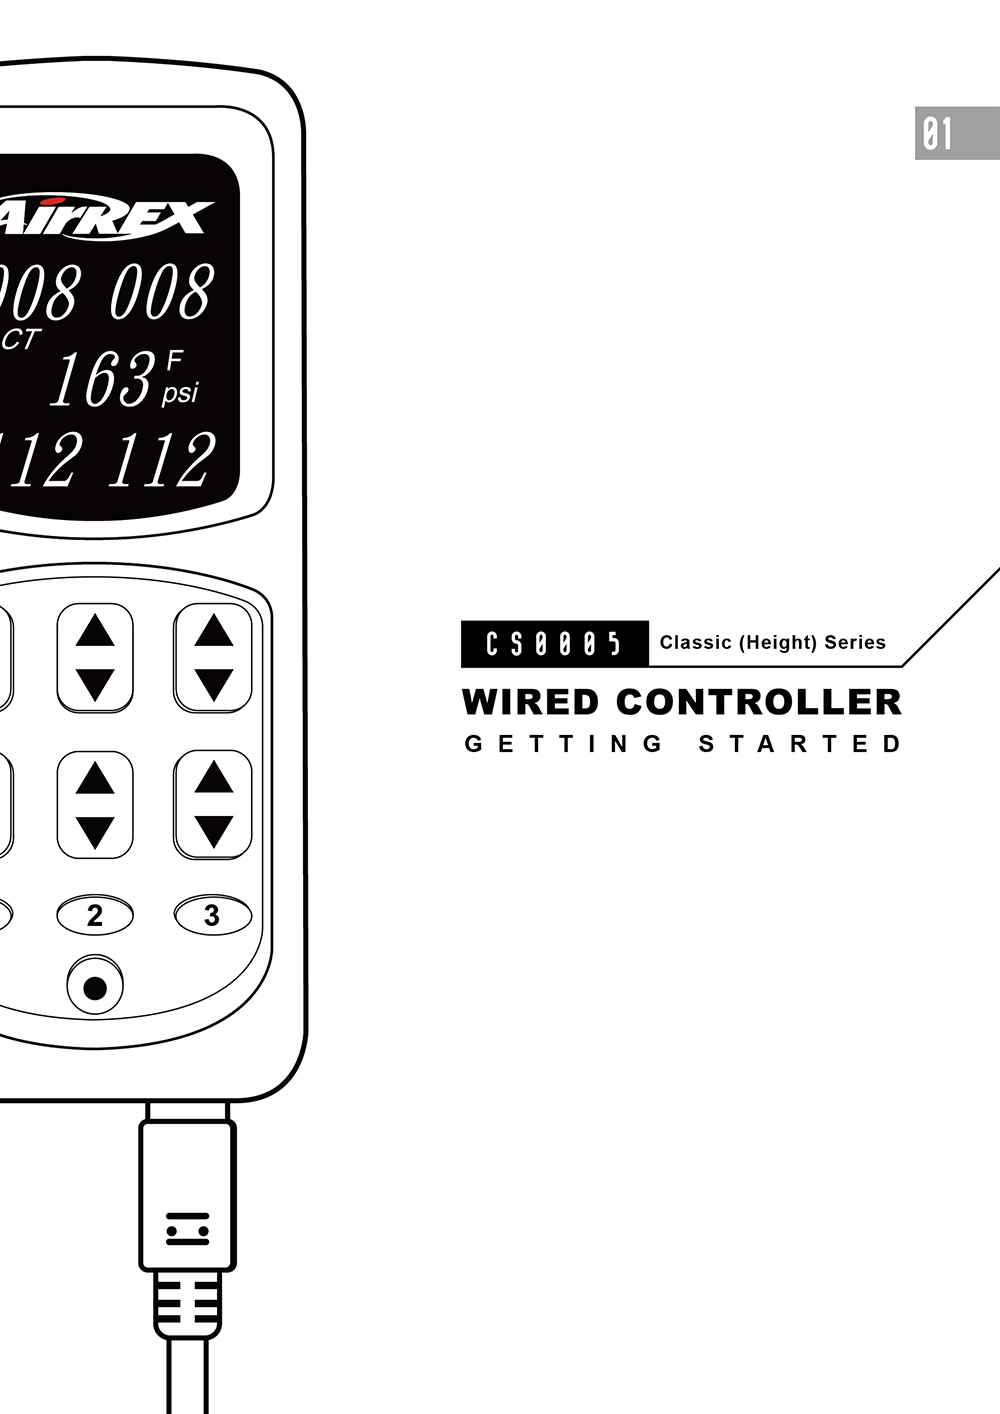 Wired controller getting started (2021.11.02)